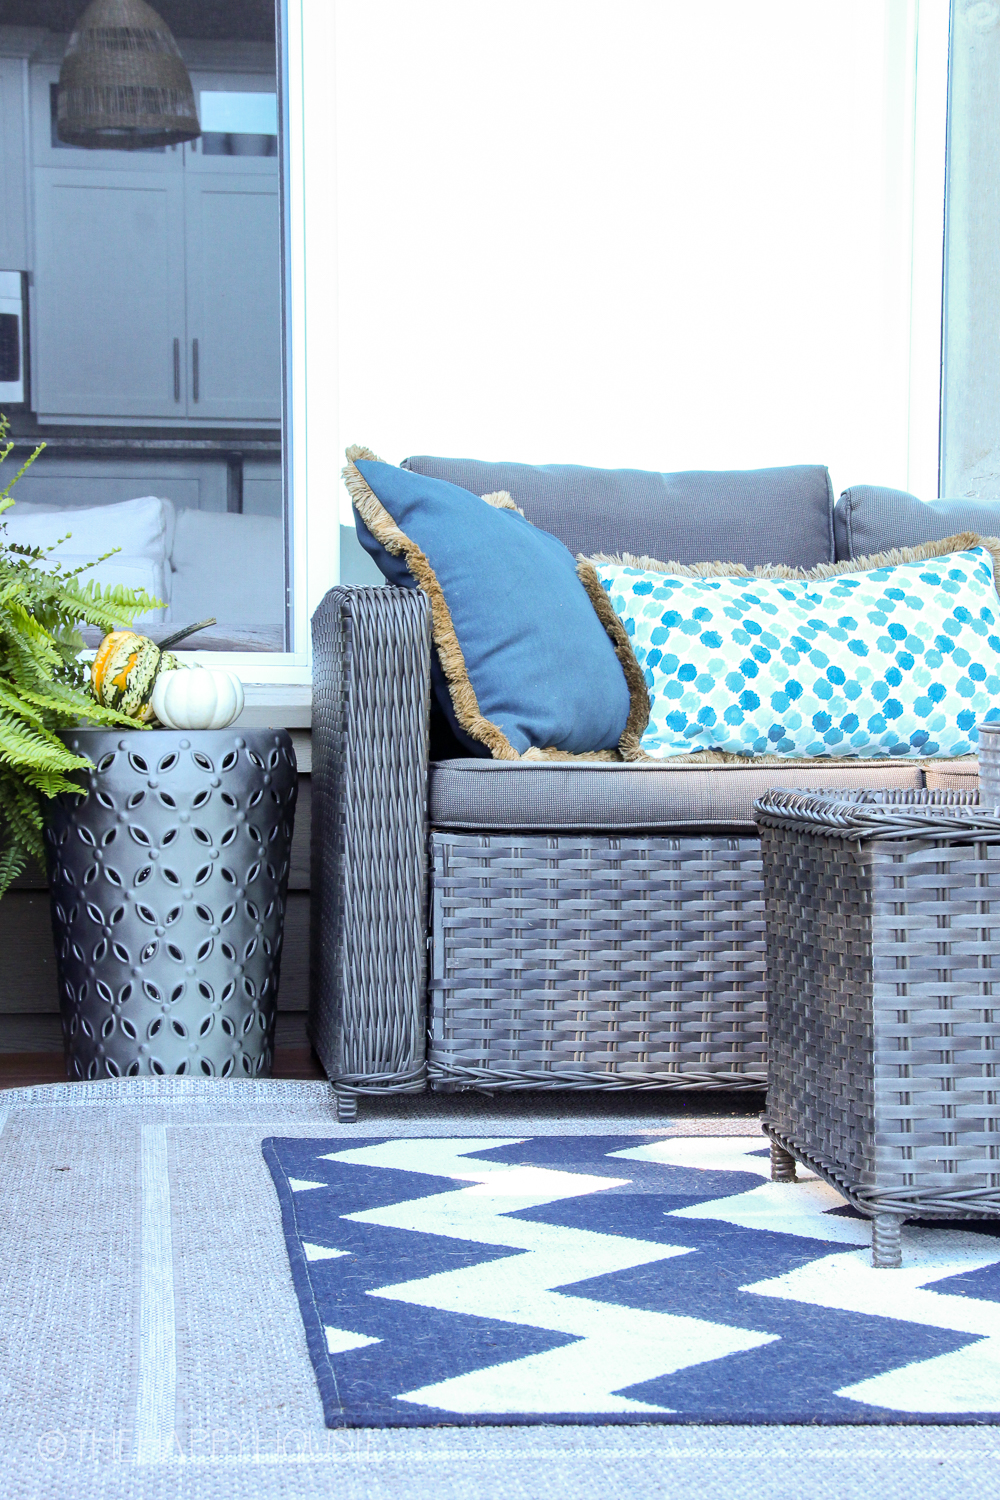 Beautiful blue and white throw pillows are on the outdoor couch.